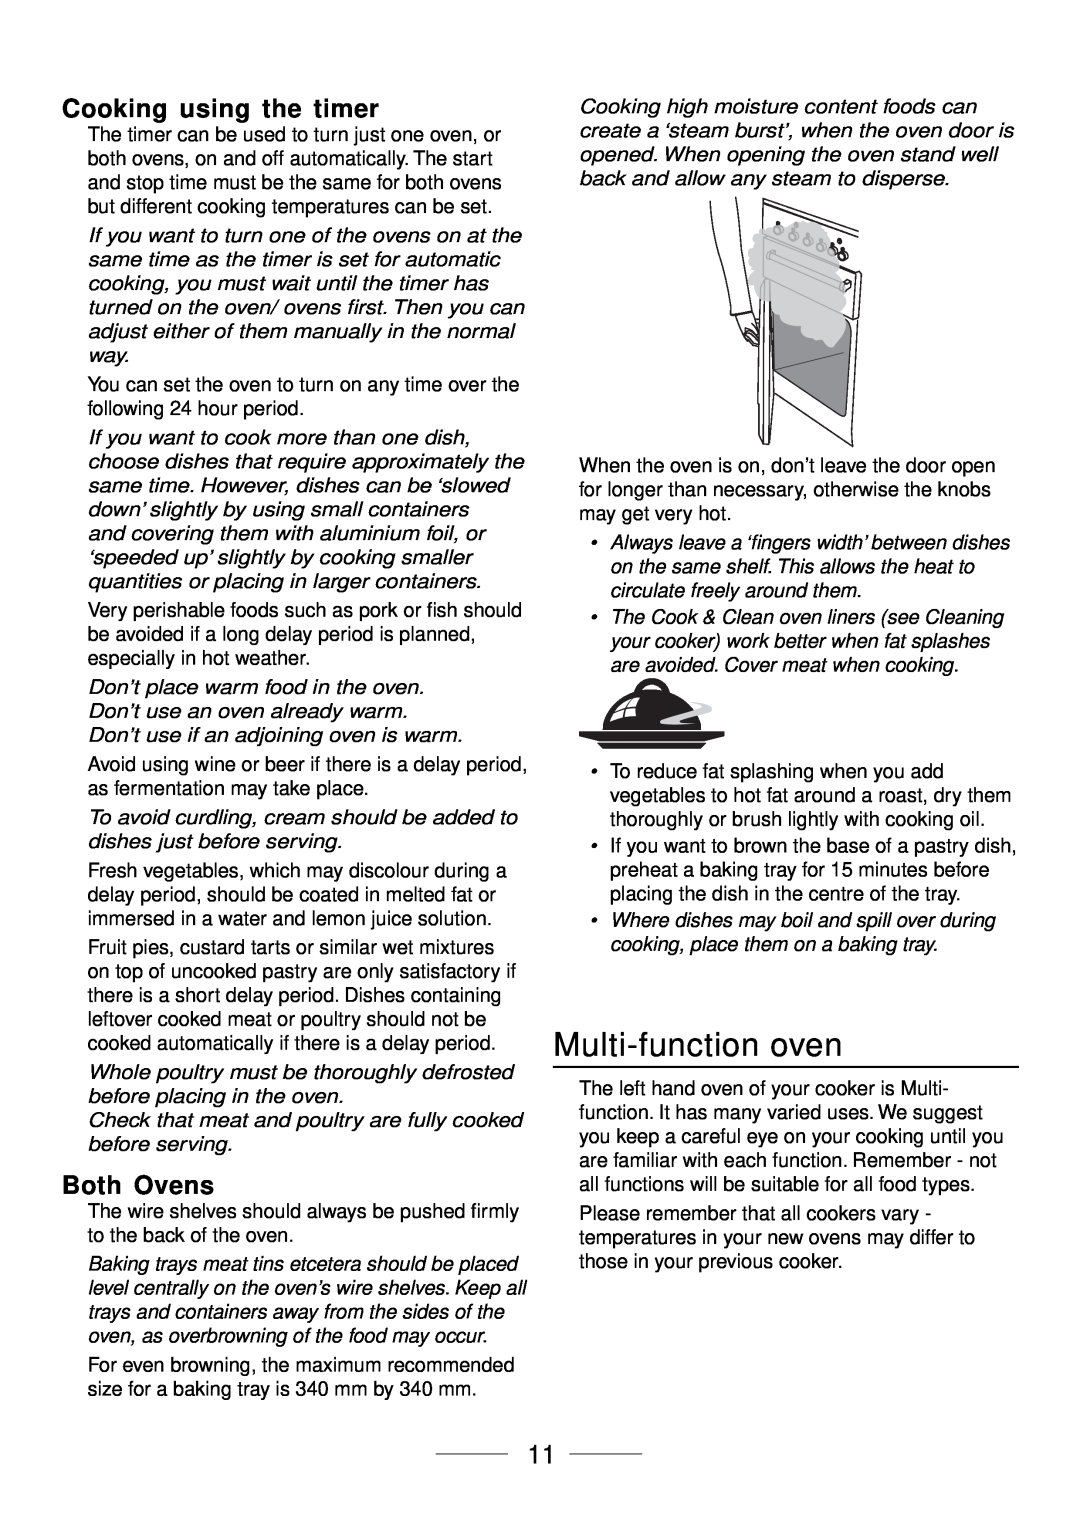 Maytag 110 installation instructions Multi-function oven, Cooking using the timer, Both Ovens 